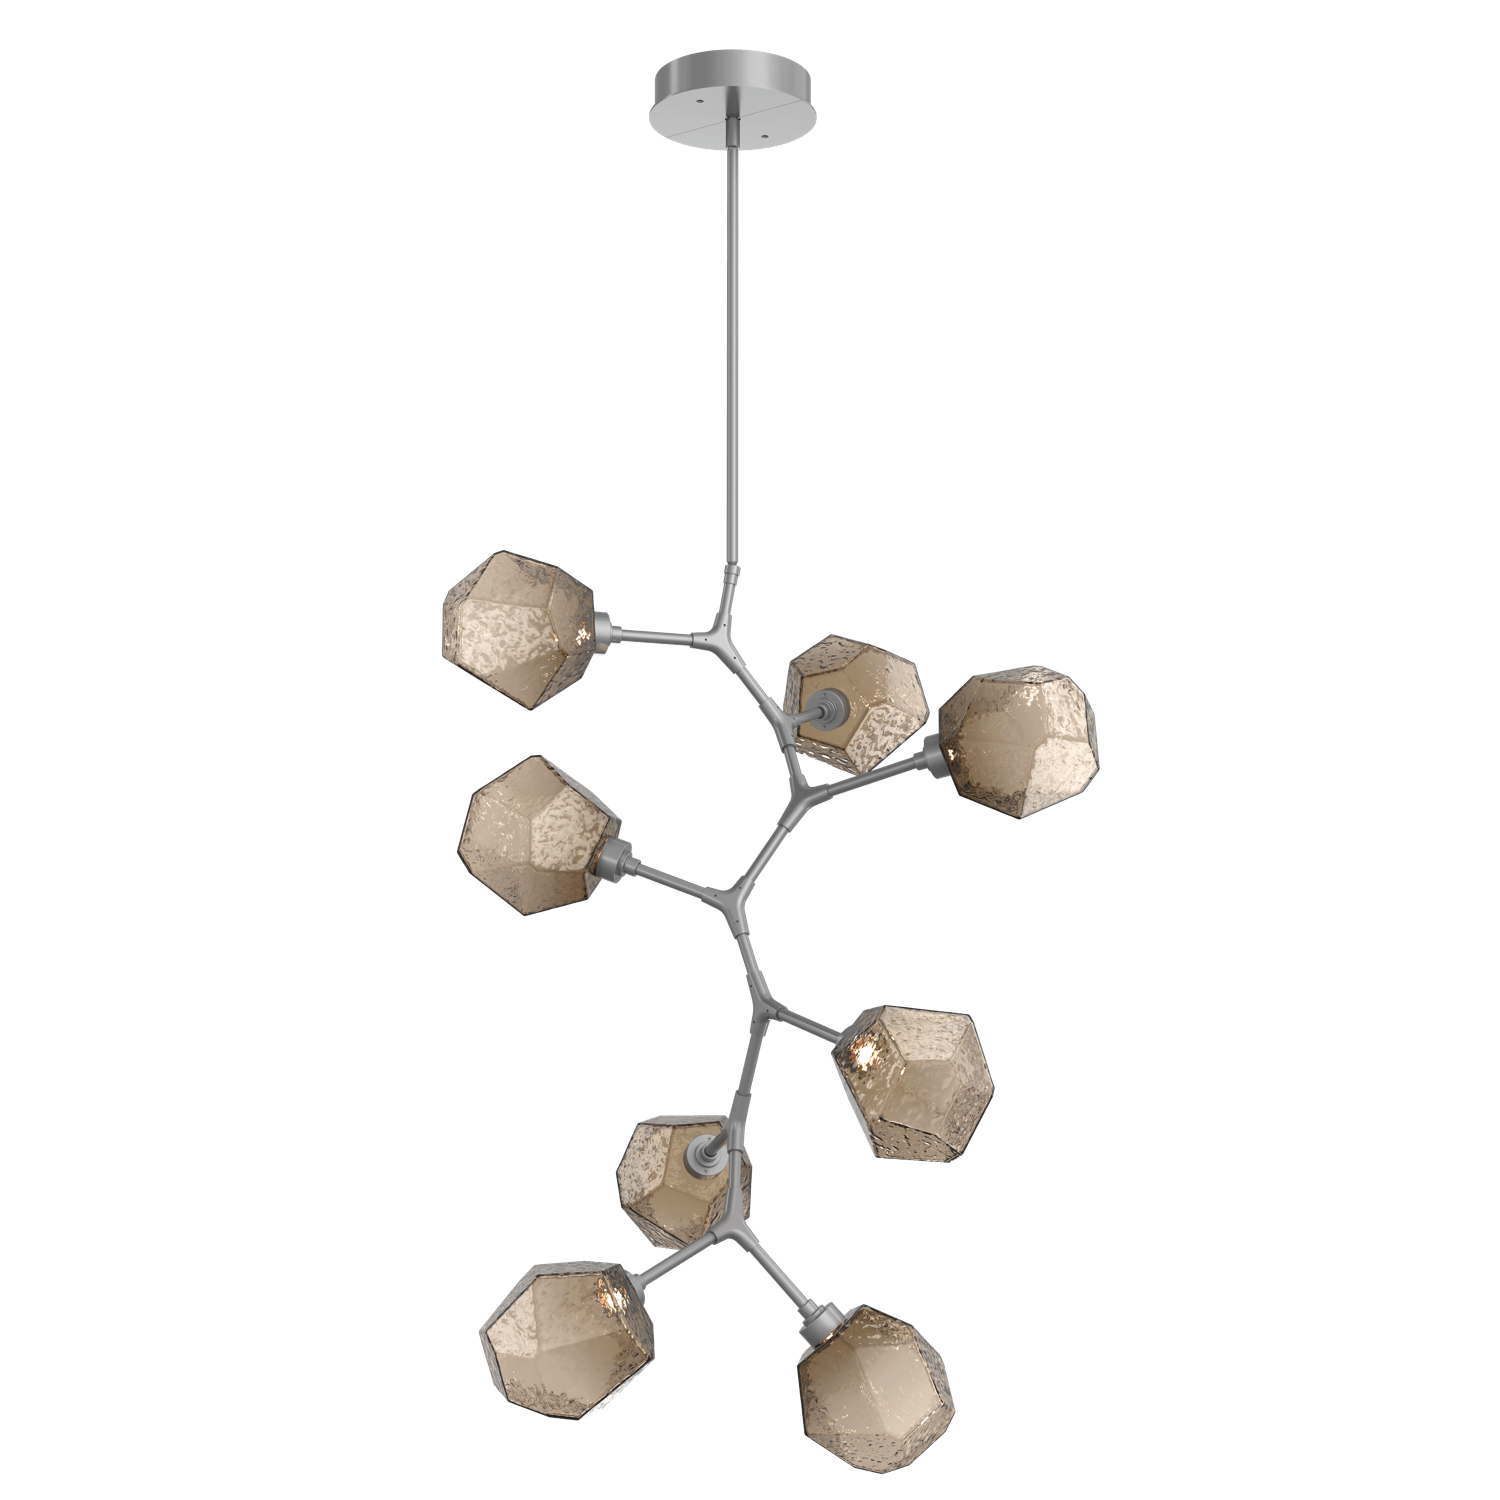 CHB0039-VB-CS-B-Hammerton-Studio-Gem-8-light-modern-vine-chandelier-with-classic-silver-finish-and-bronze-blown-glass-shades-and-LED-lamping